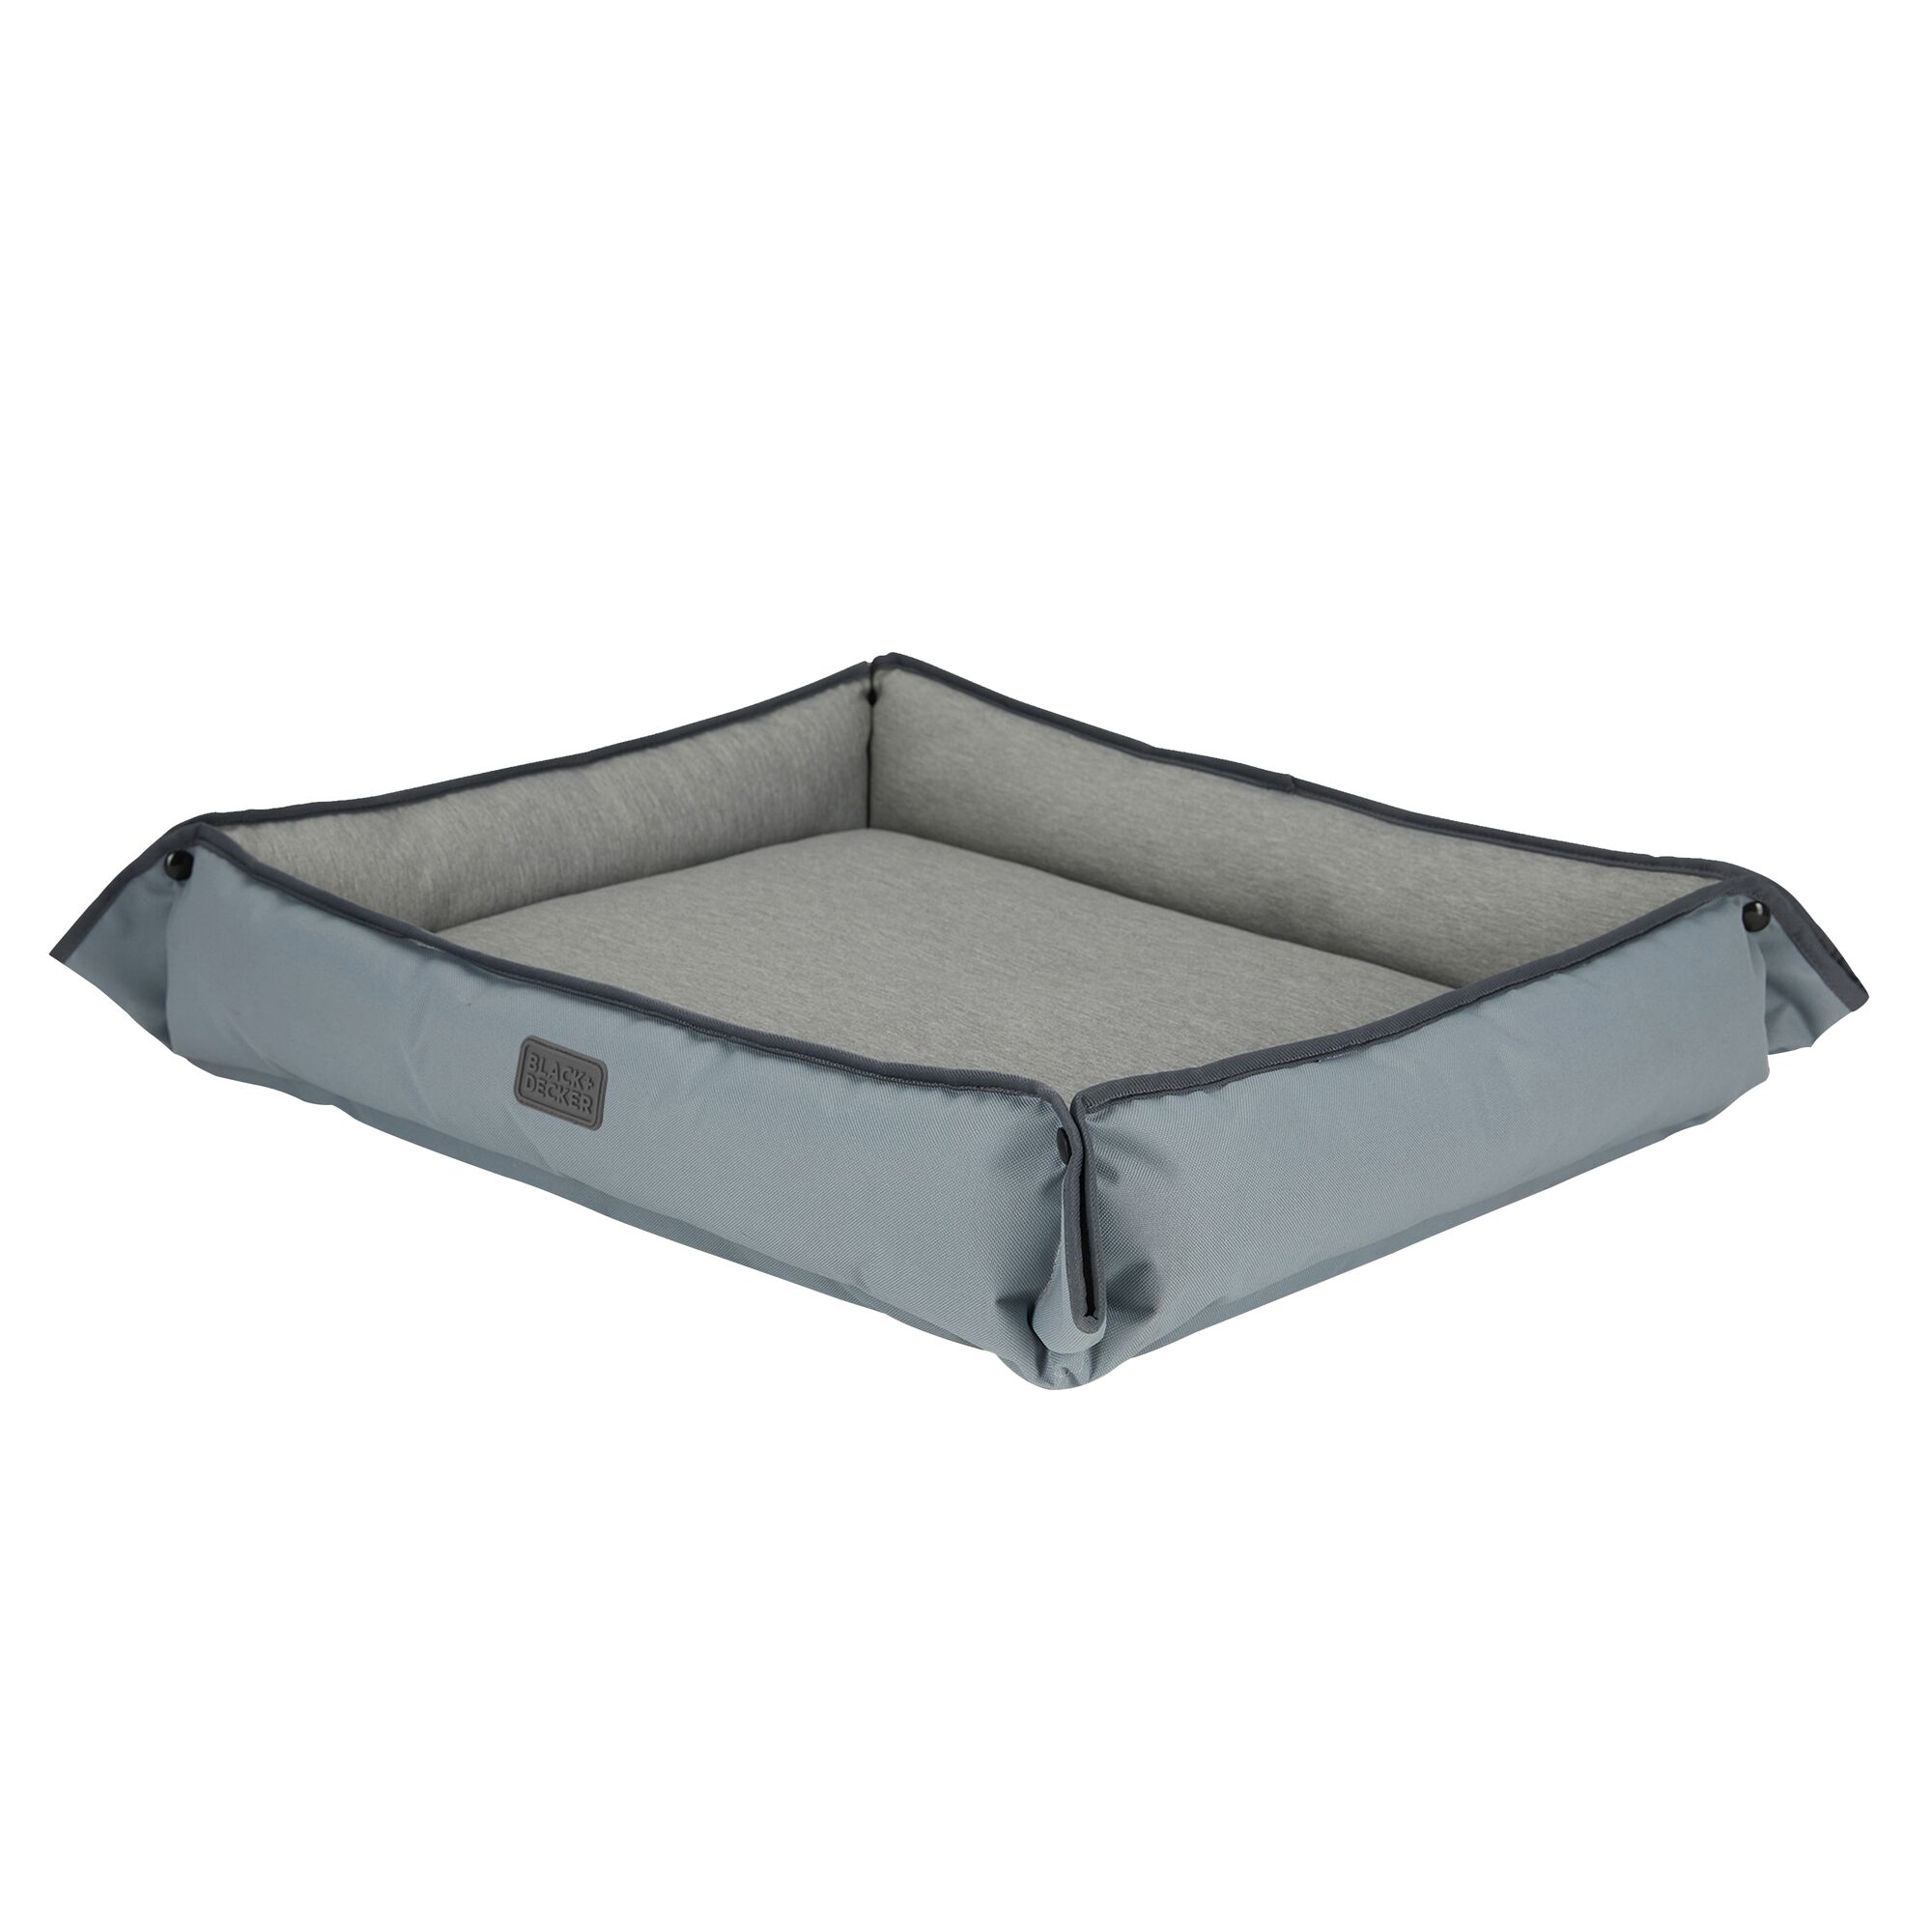 Profile image of the BLACK+DECKER four sided plush pet bed in gray